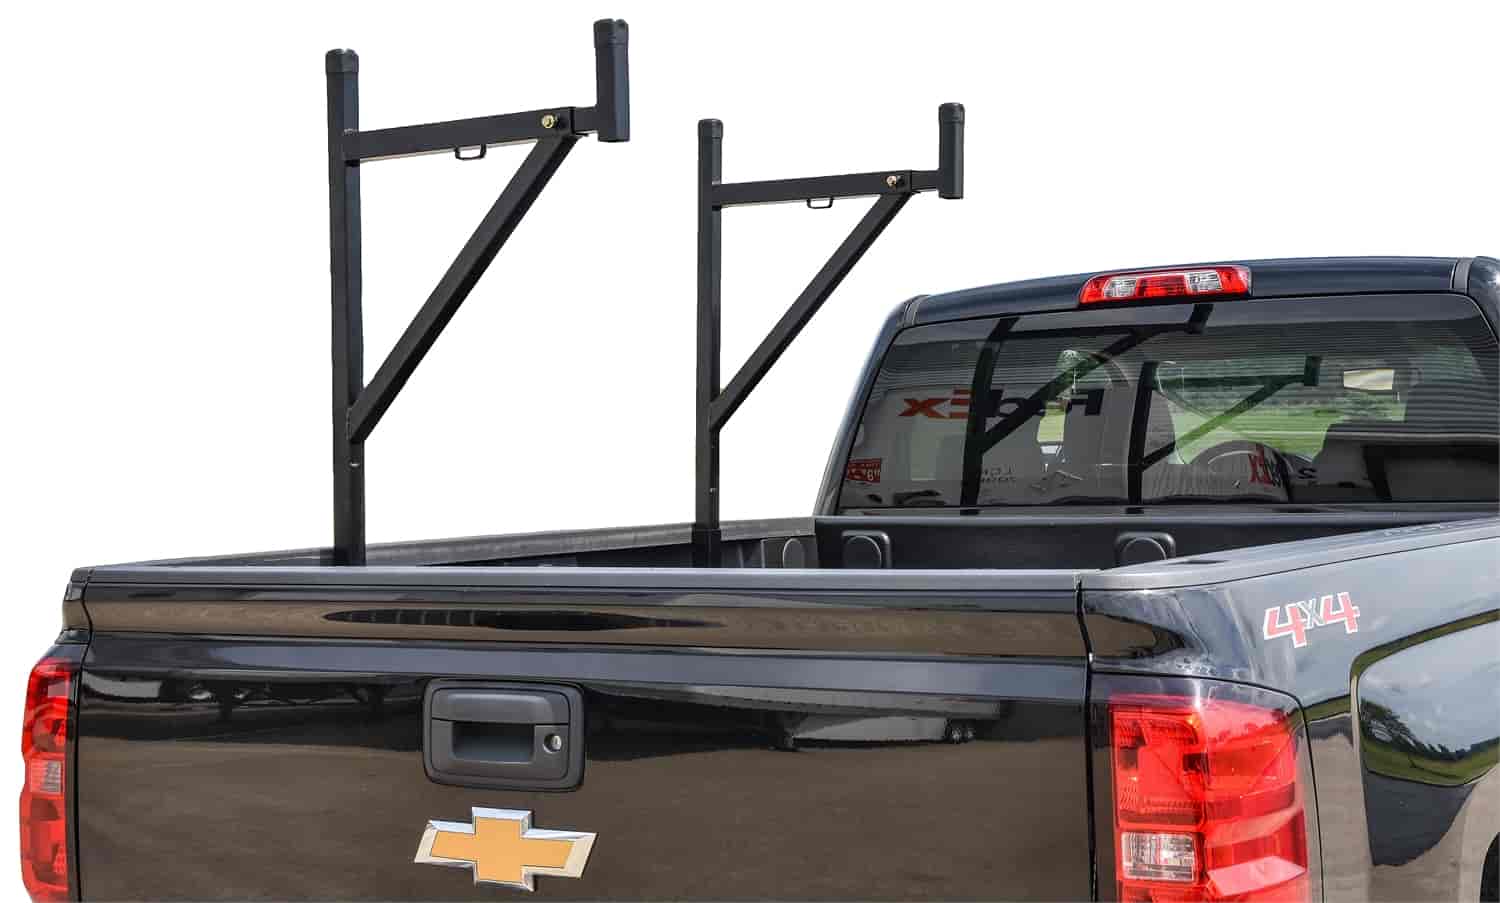 Heavy Duty Truck Ladder Rack Arms Adjust from 19 1/2 in. to 32 3/4 in.